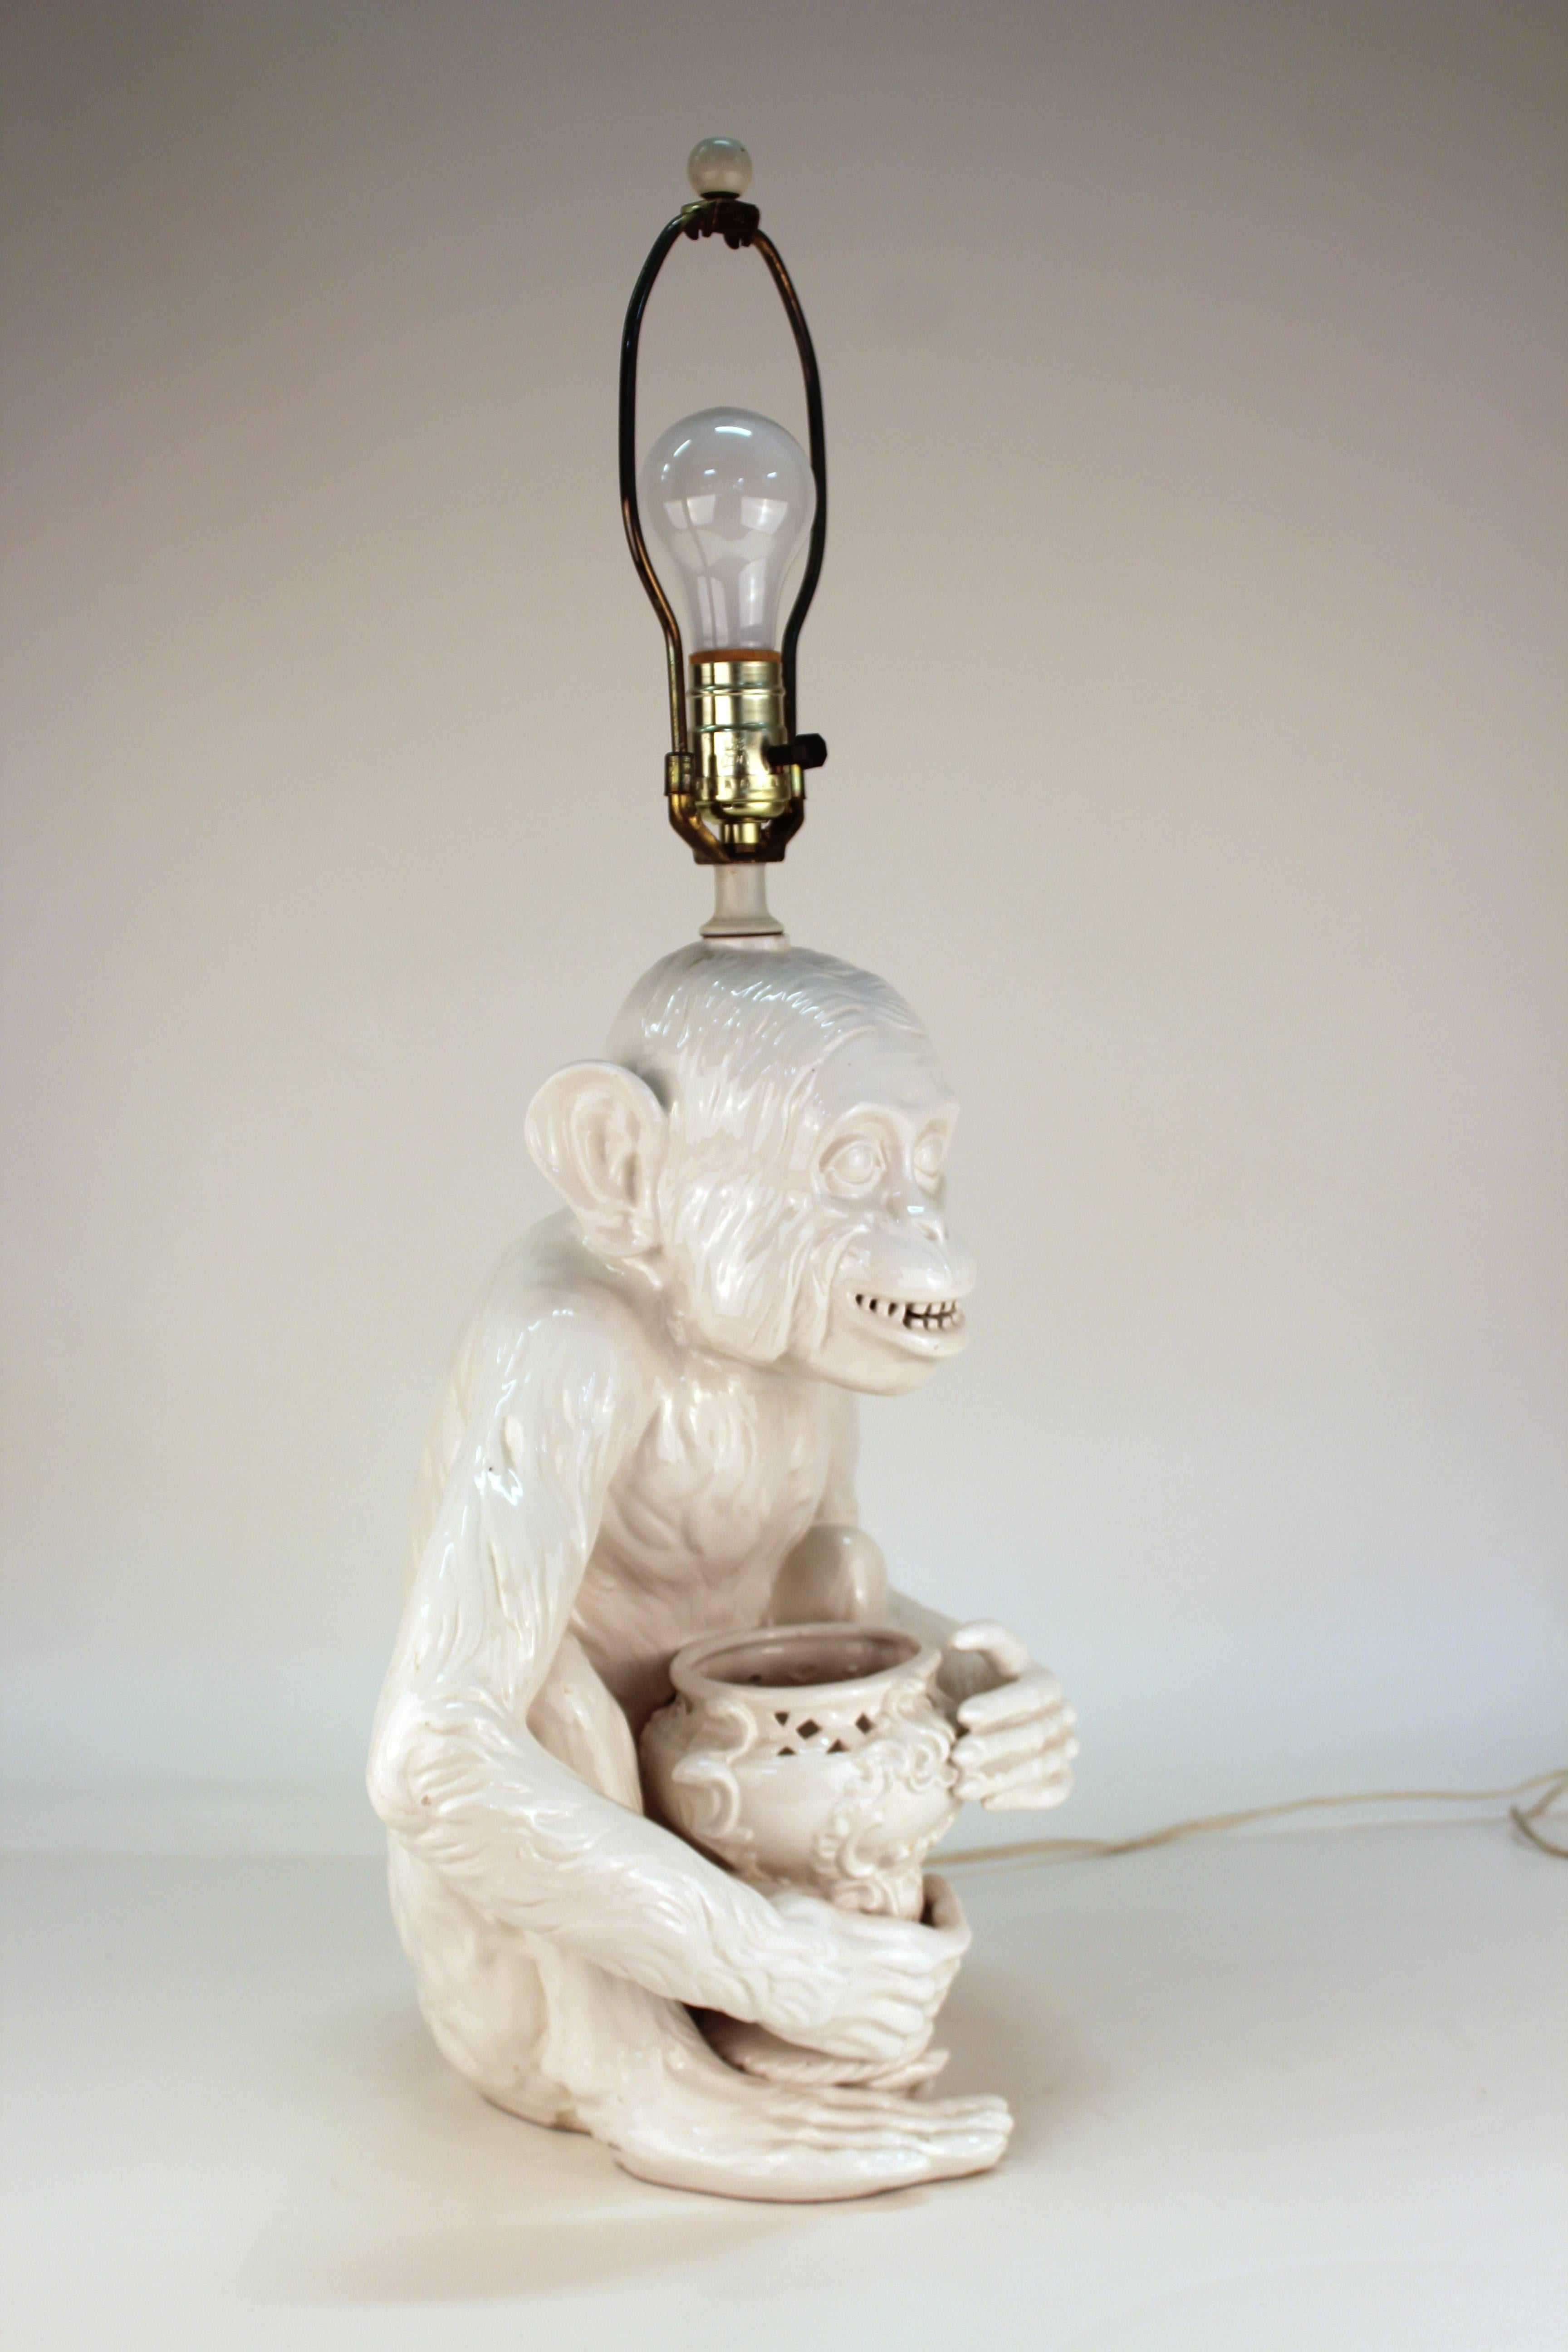 A Hollywood regency ceramic table lamp in shape of a seated grinning monkey holding an urn. The piece is in good vintage condition with age-appropriate wear.